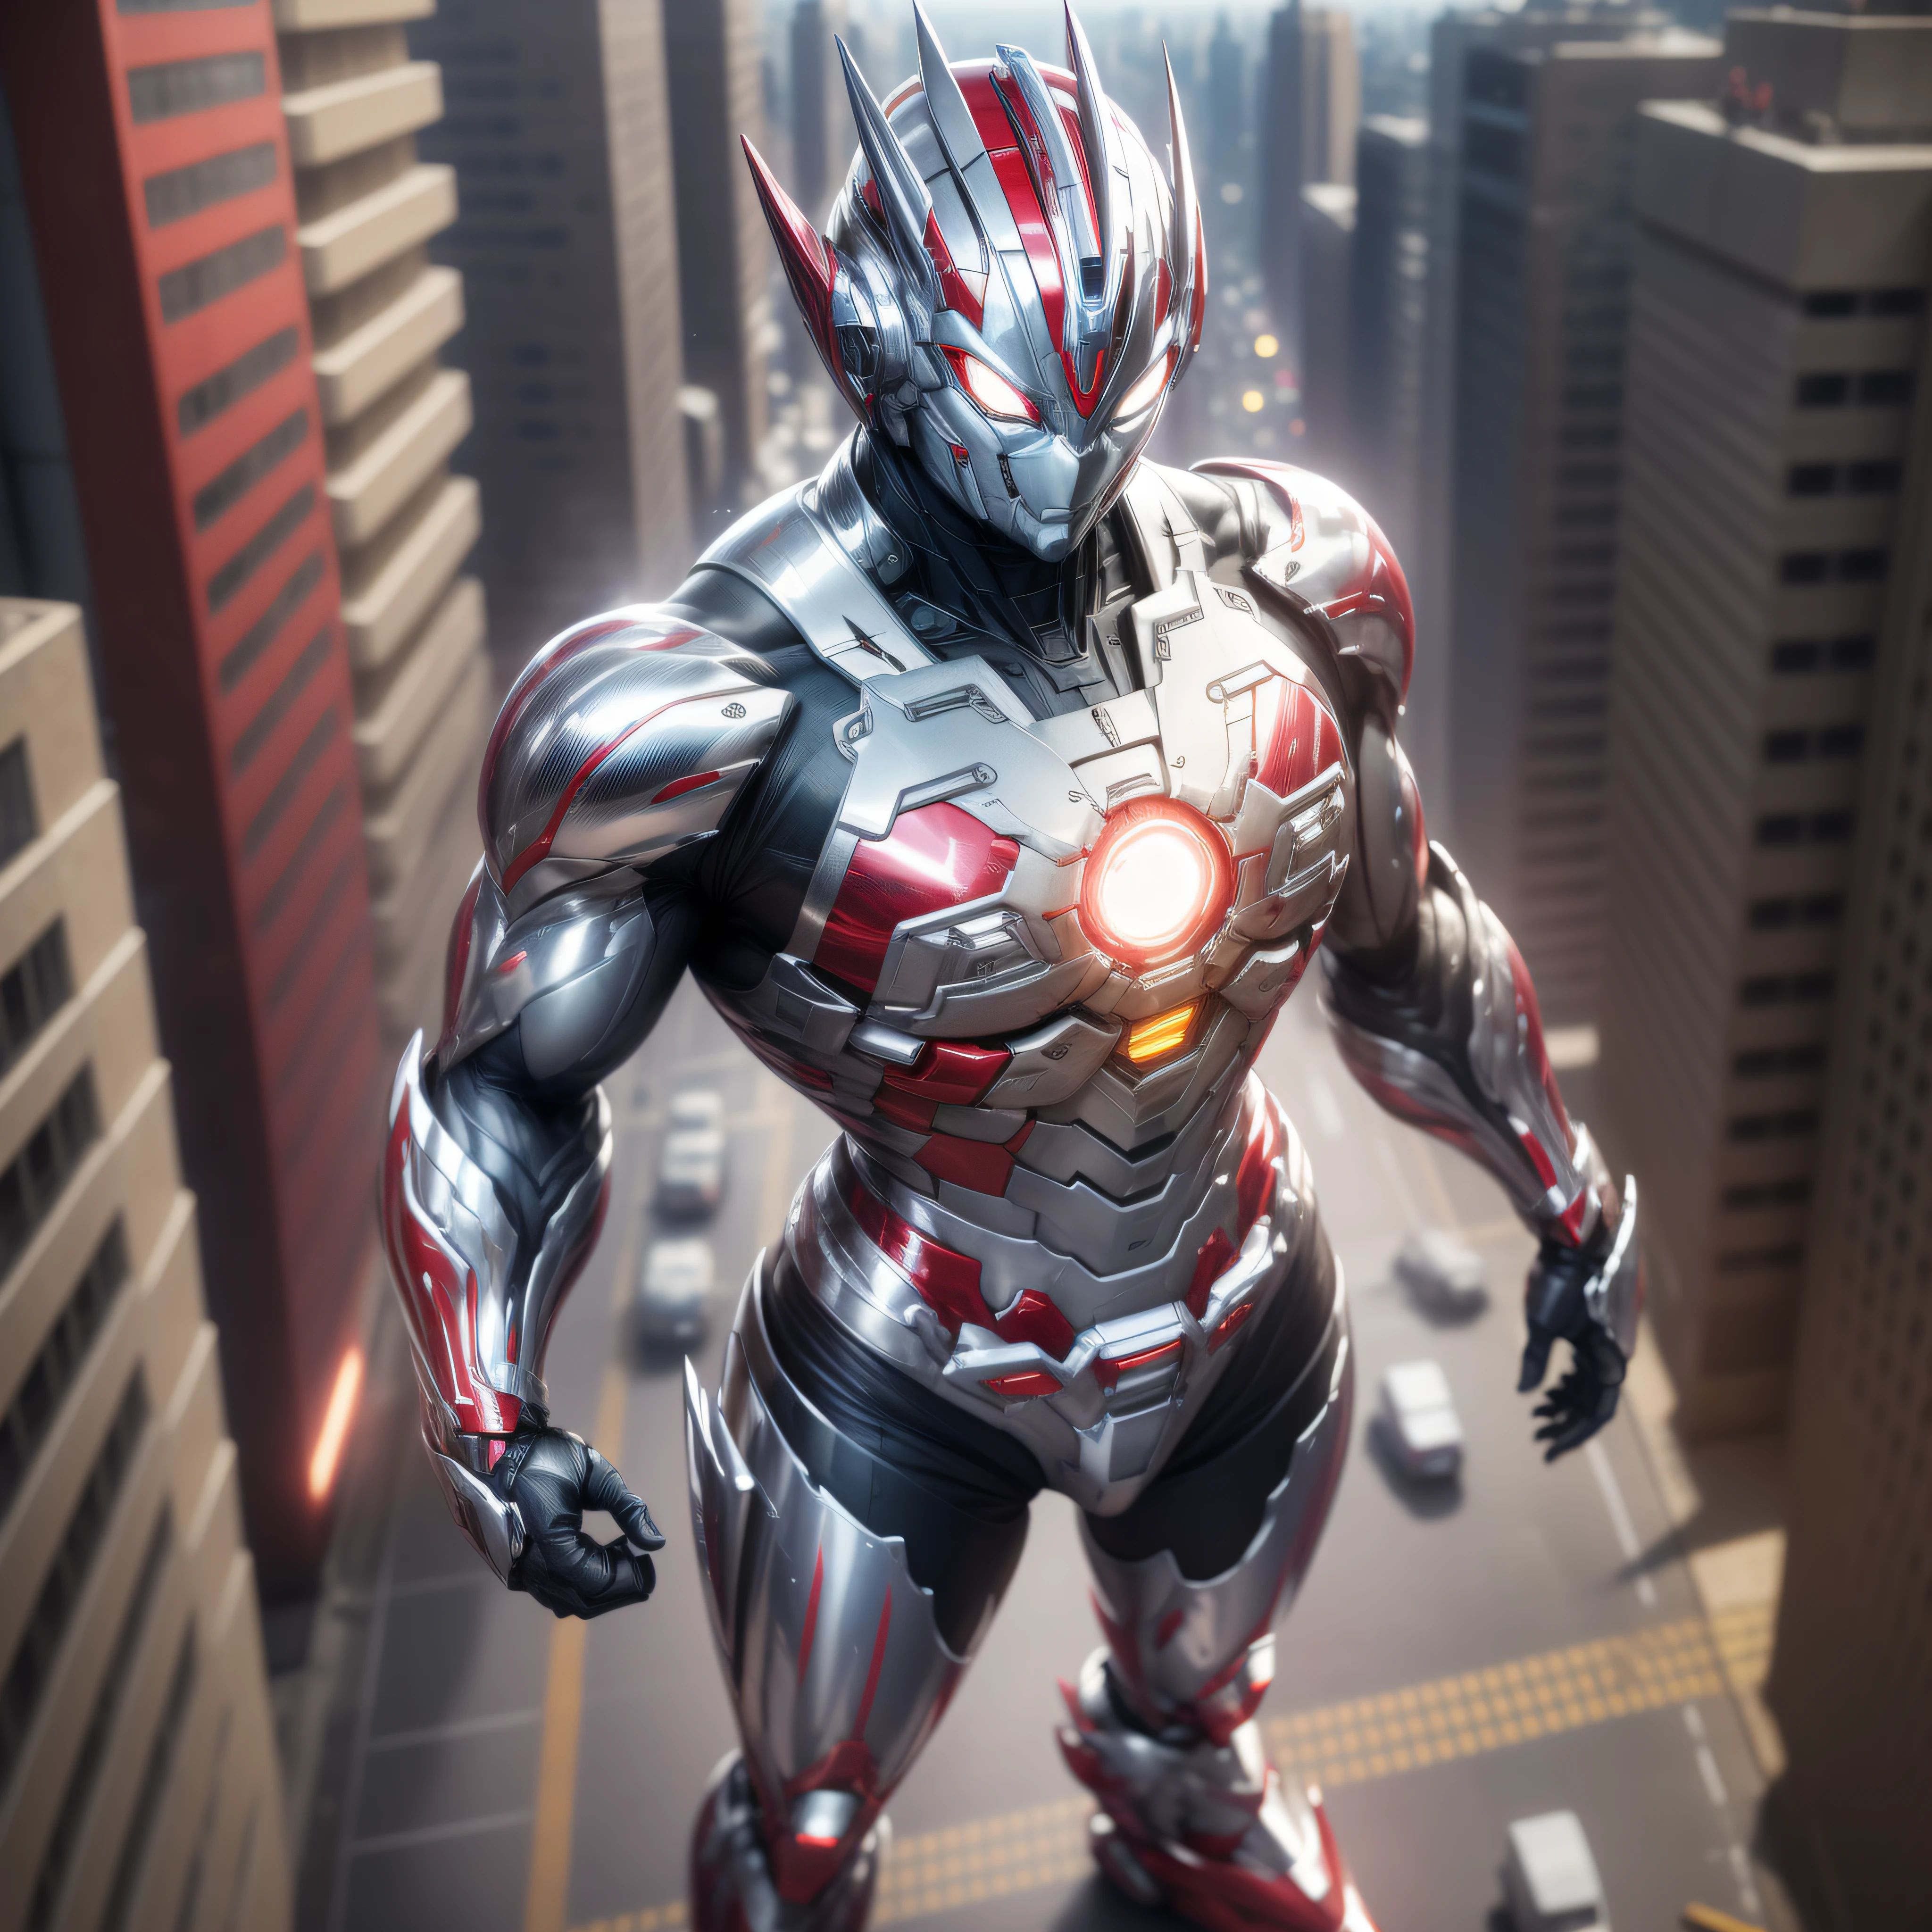 (Masterpiece, Superb Quality, Super Delicate, High Resolution), Male Focus, (((Mobile Ultraman))), (No Muscles))), (His head is tapered, his body is made of (((red chrome))) and silver (((chrome))), his arms are streamlined, he has a small round calculator on his chest, he looks tall and athletic, the overall look is streamlined and modern), (standing pose), pose for photos, high angle, dark night, populated city, background details, ((((whole body))), from above, solo, photo-realistic, octane render, unreal engine, ultra-realistic ((( Huge feeling)))